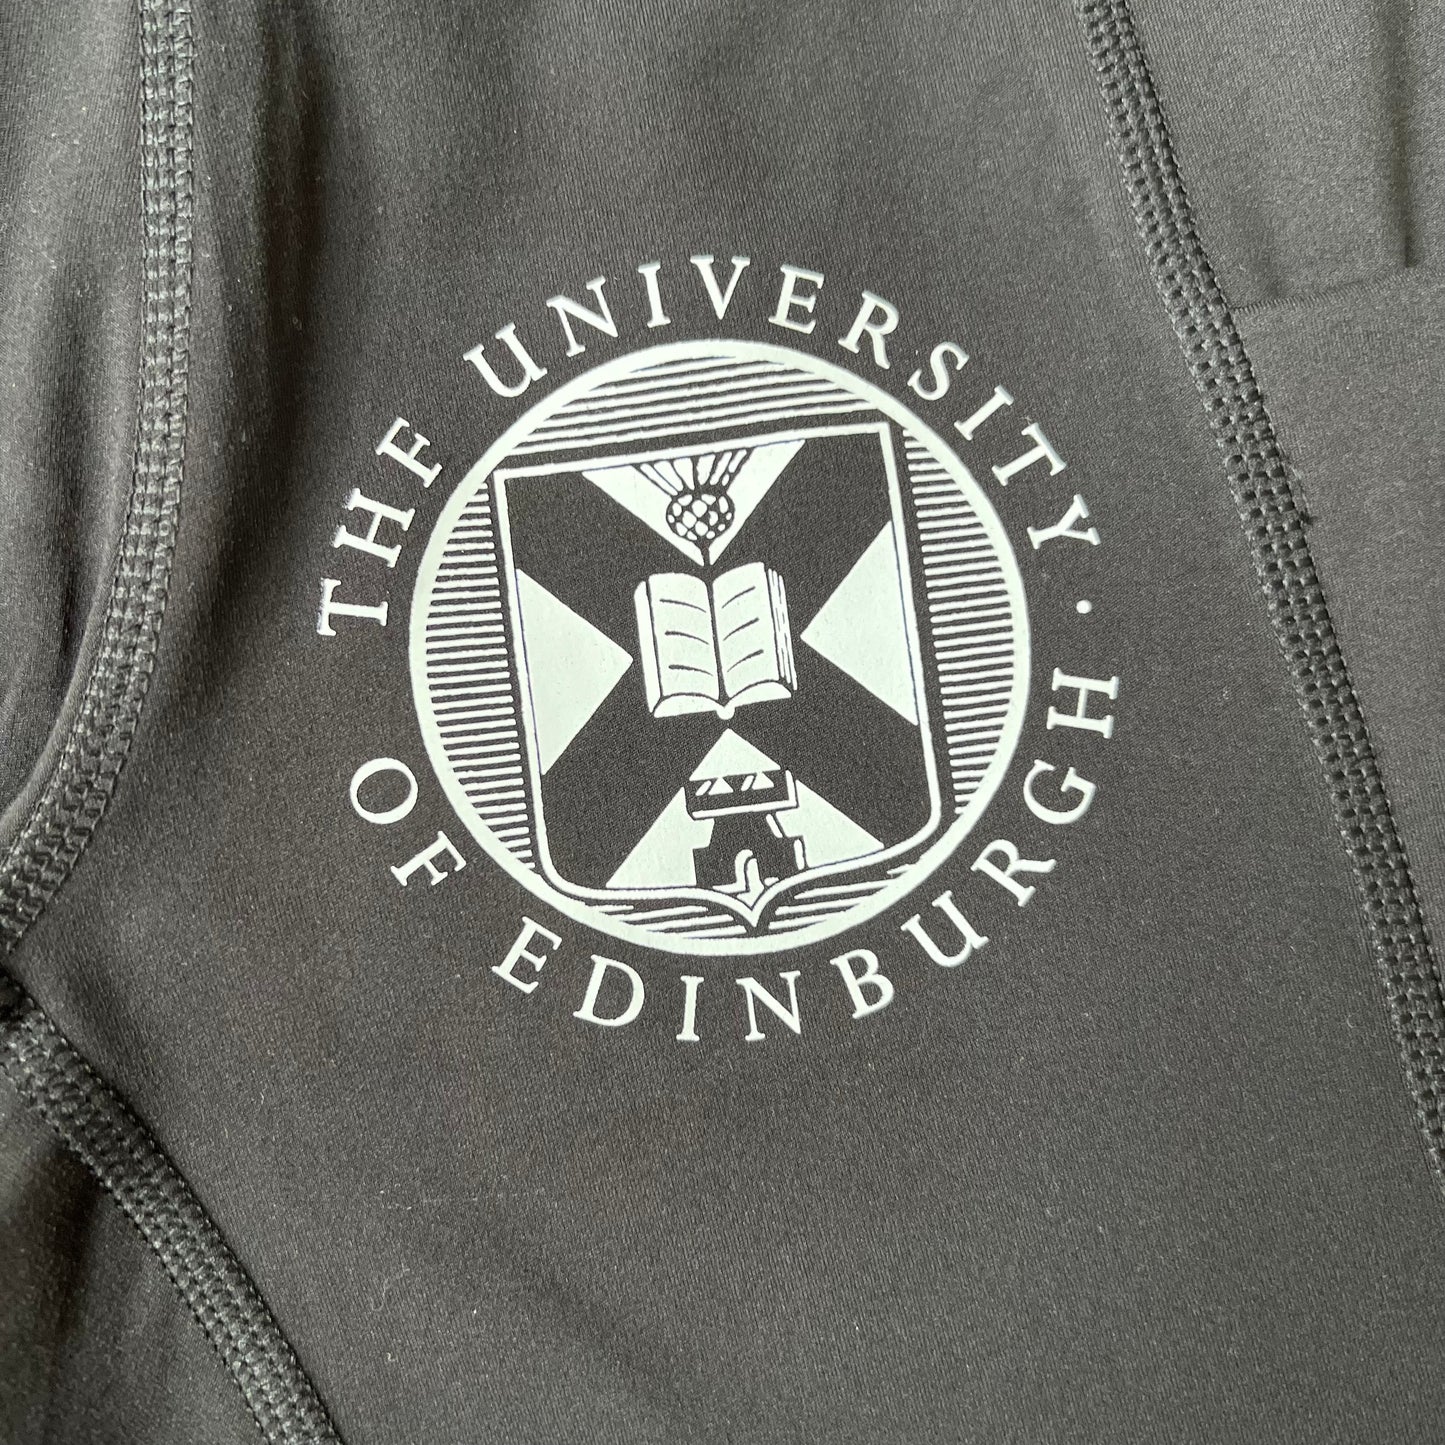 CLose up of the university crest in white